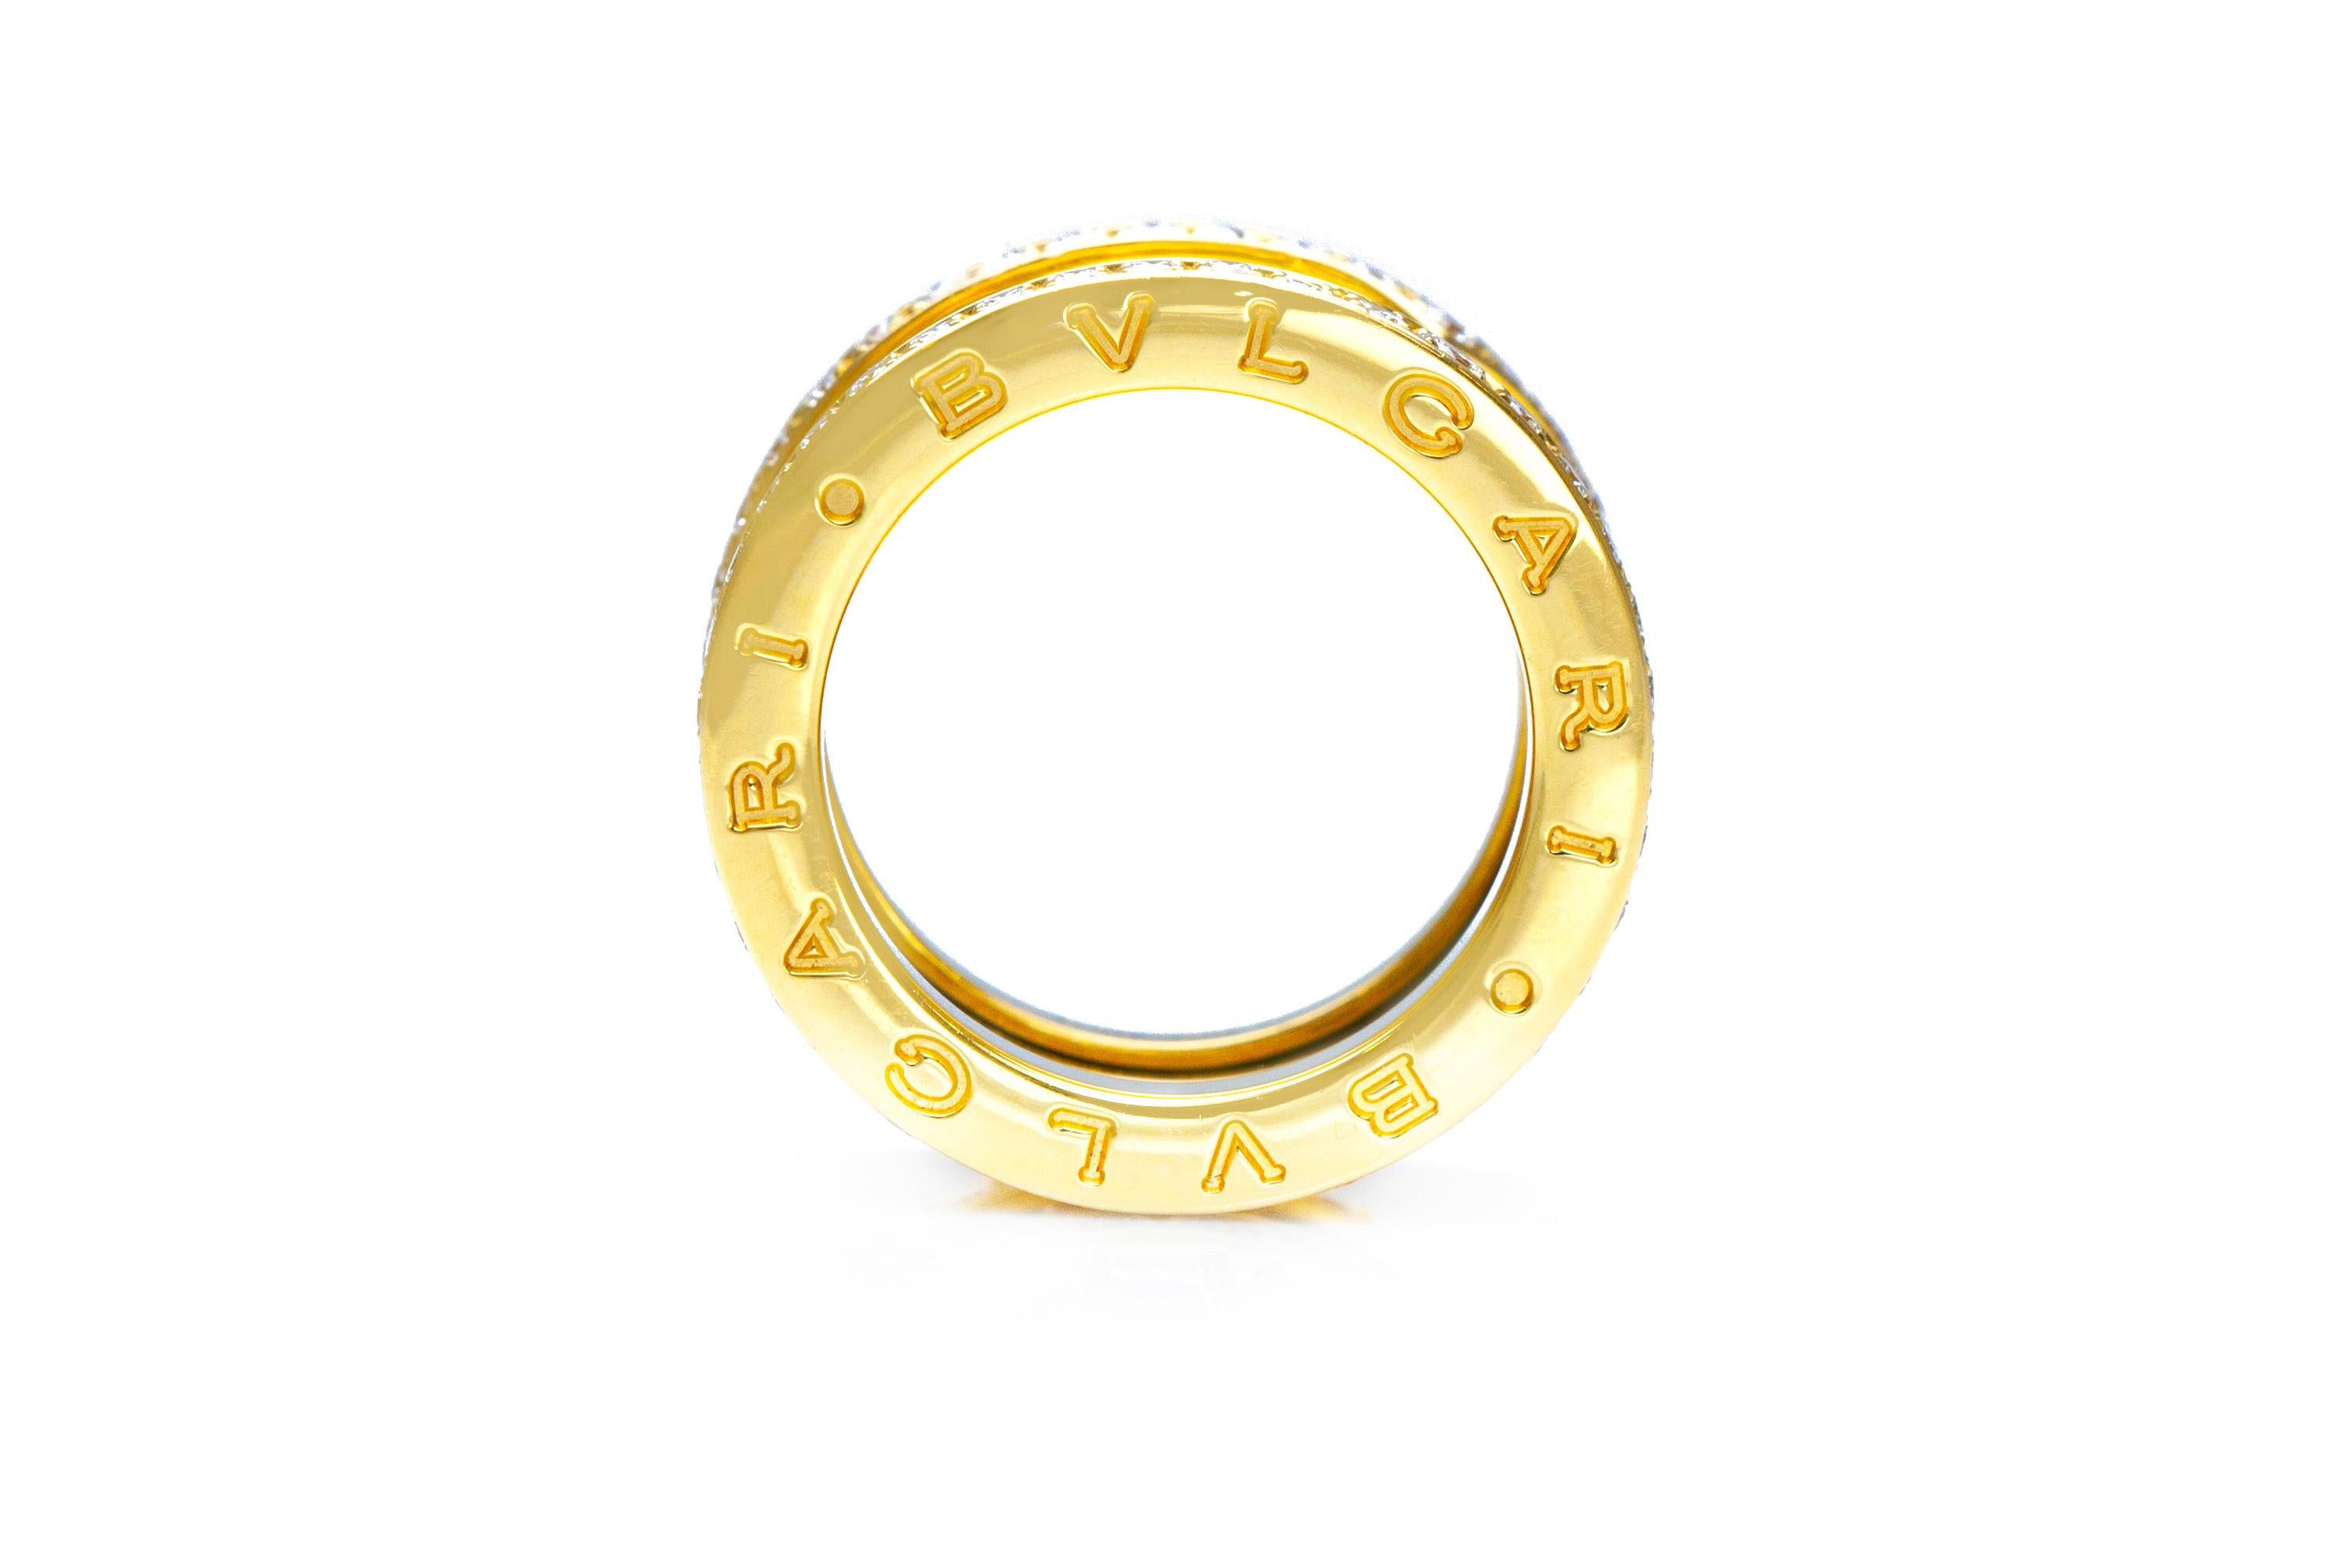 Bvlgari B. Zero 1 ring finely crafted in 18K yellow gold.
The four-band ring is set with pavé diamonds on the edges weighing an approximate of 0.80CT.
